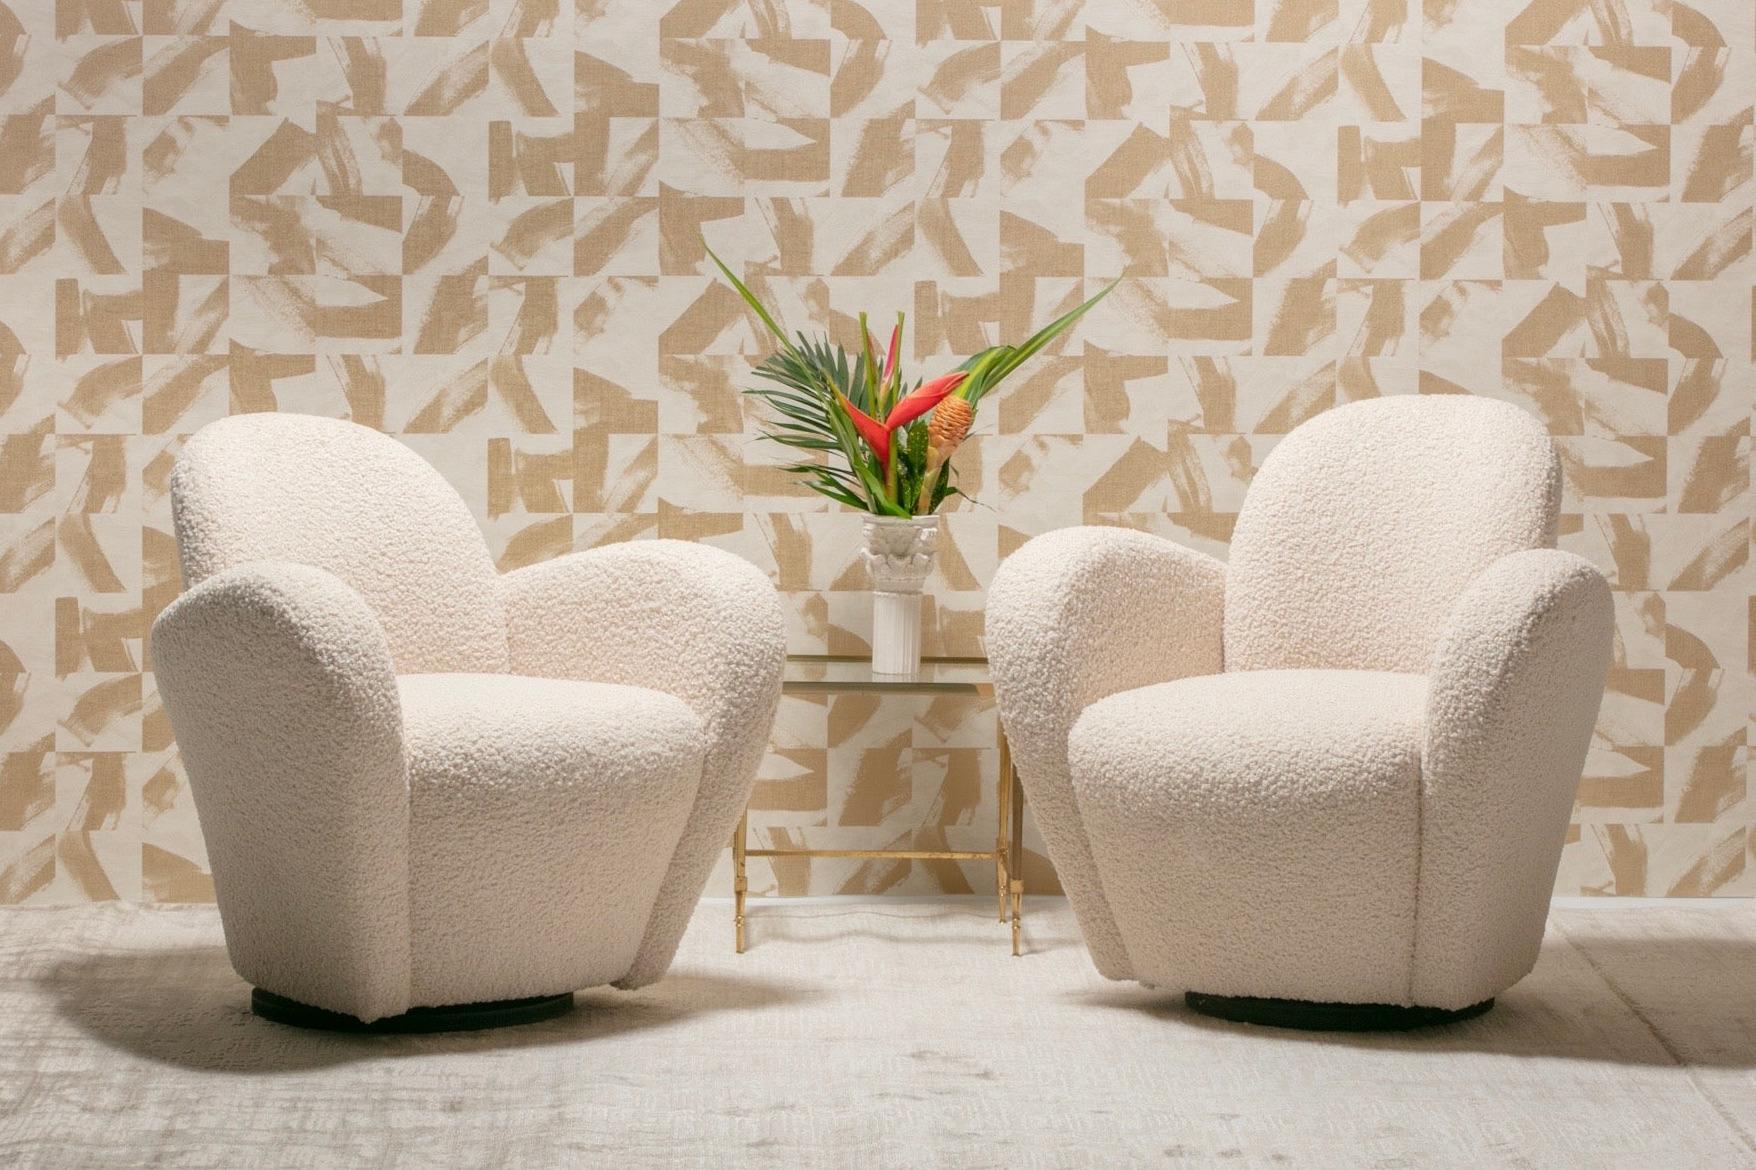 Sexy pair of Michael Wolk Miami chairs with swivel bases and en-suite ottoman professionally reupholstered in luxurious ivory bouclé. Frequently mistaken as designed by Vladimir Kagan, these Michael Wolk Miami chairs are iconic and were most